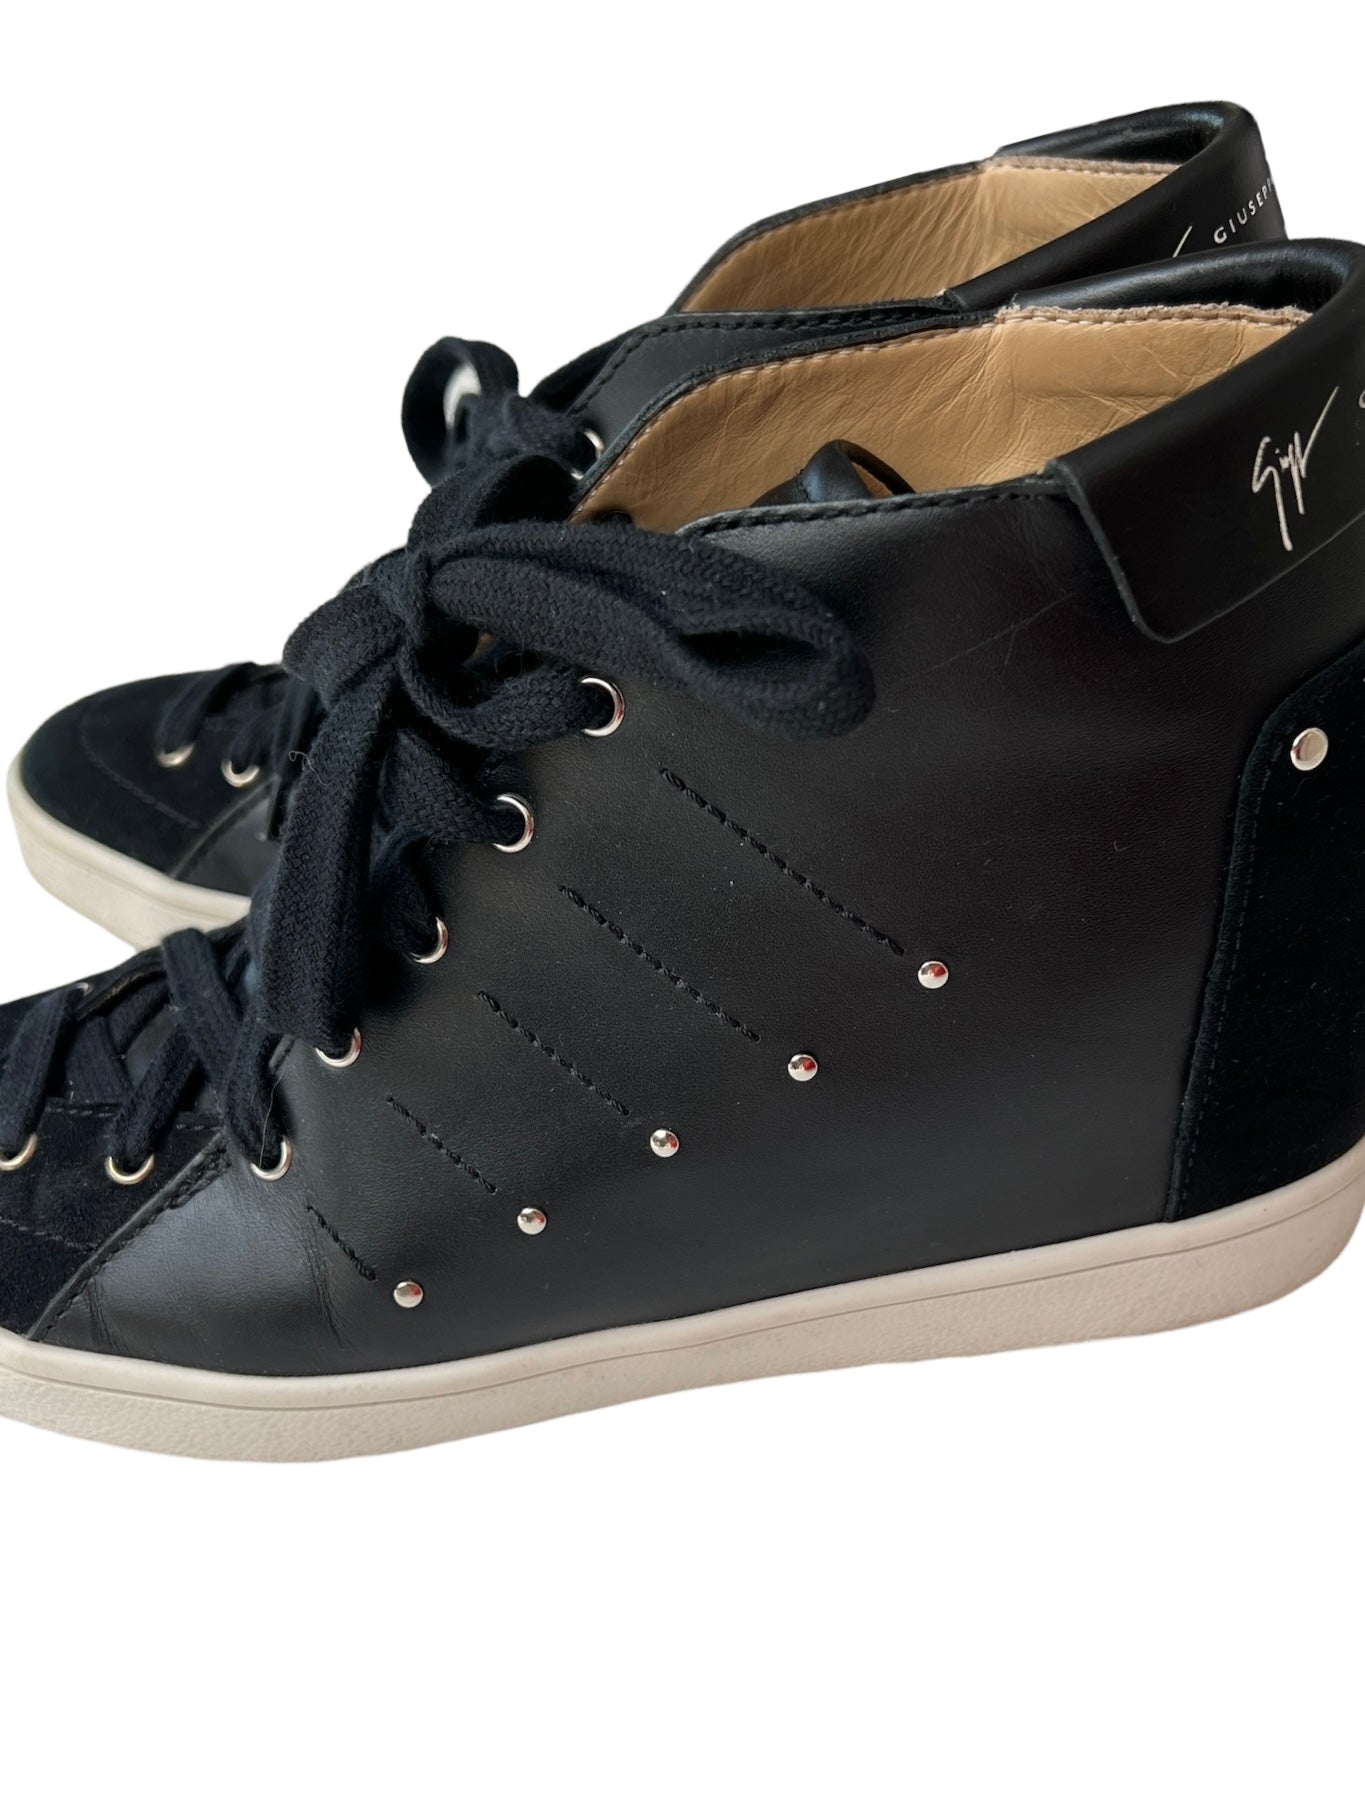 Black Leather and Suede Sneakers - 7.5